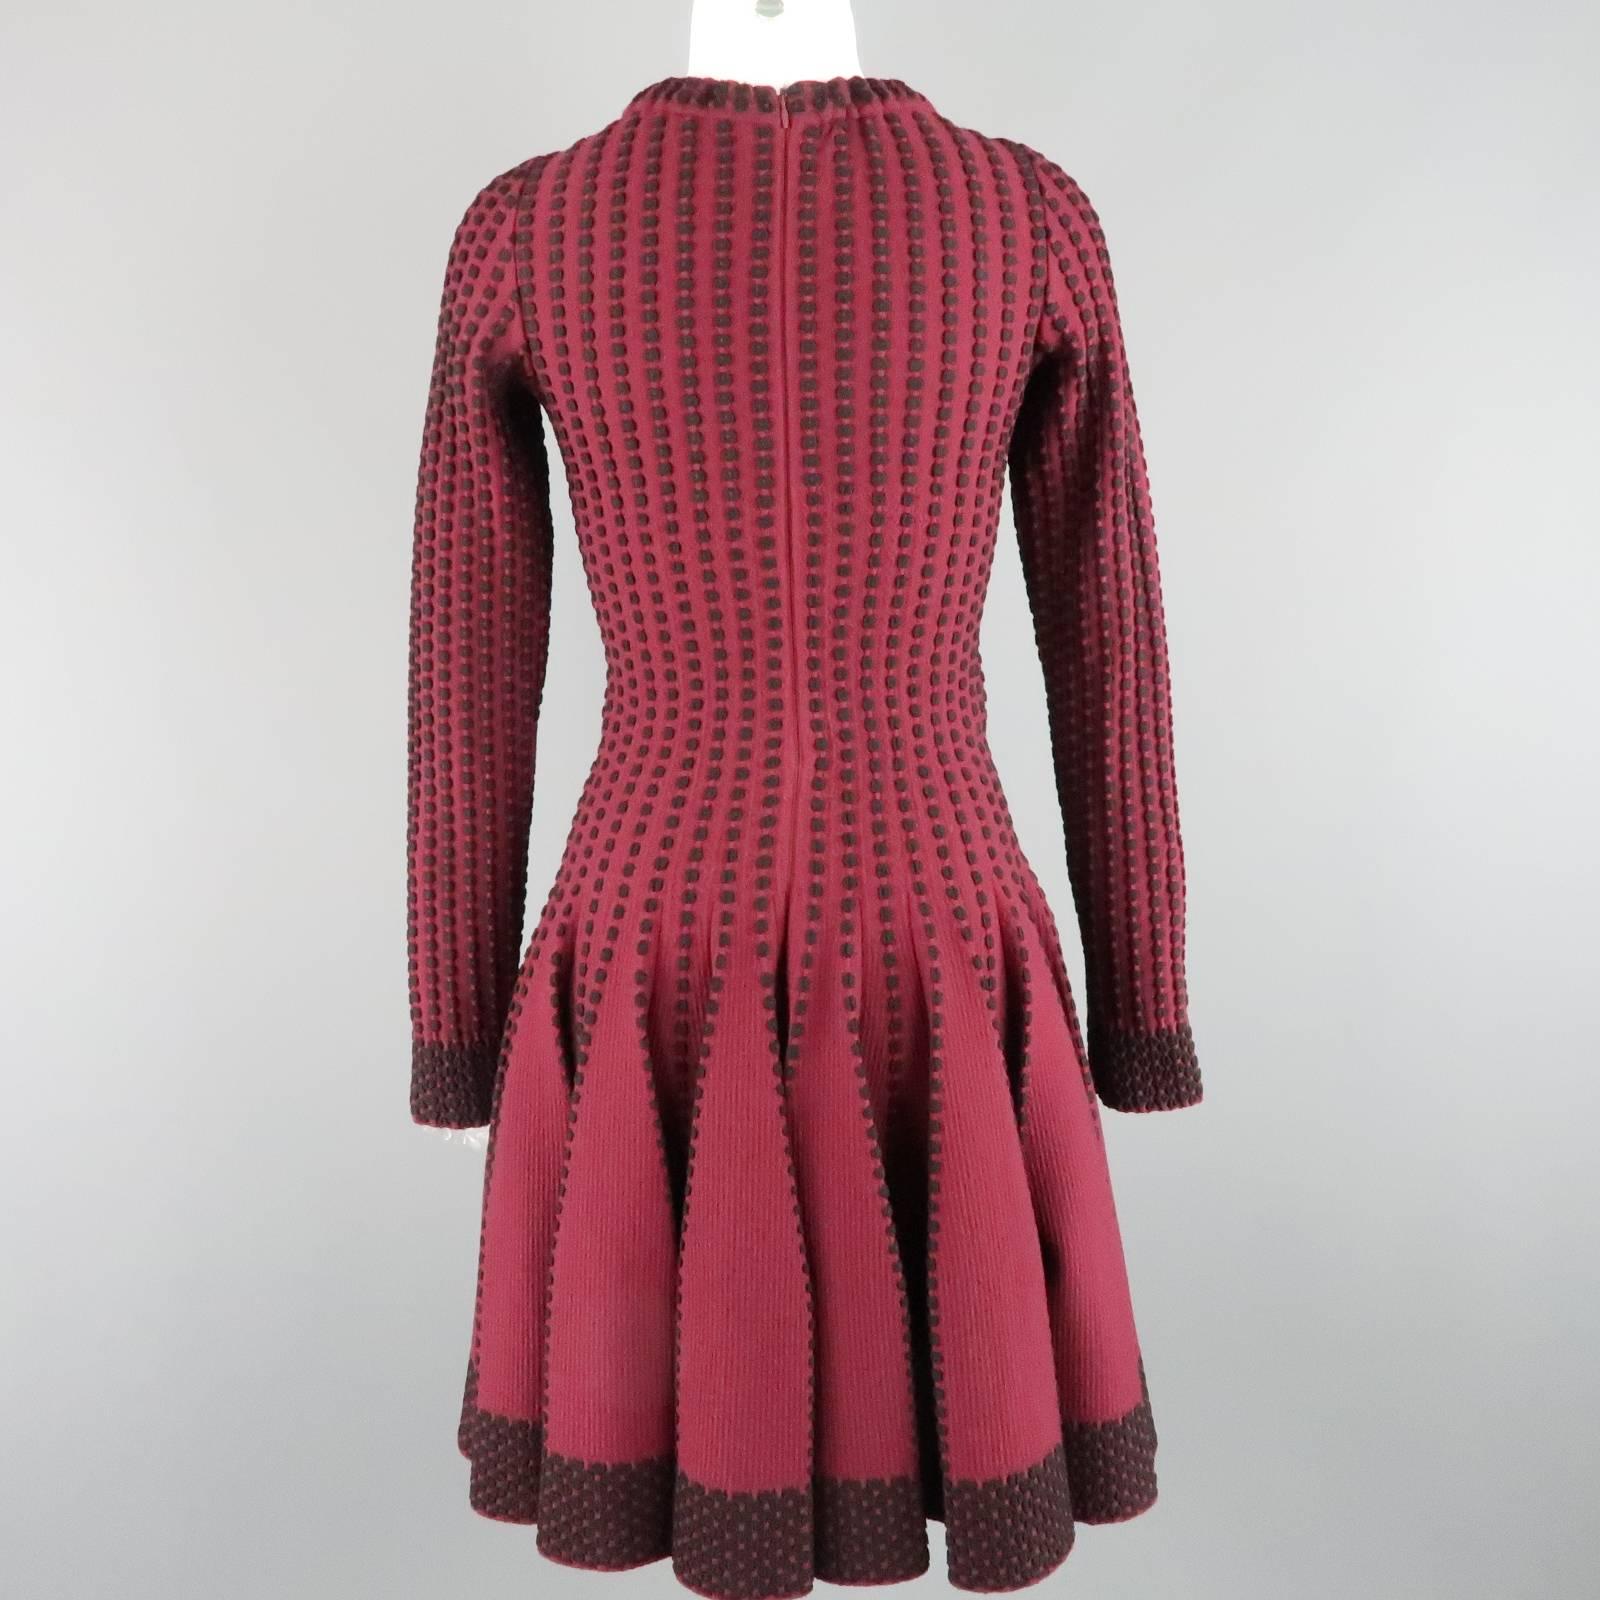 Alaia Burgundy and Black Stretch Wool Fruit Flair Long Sleeve Dress, Size 10 3